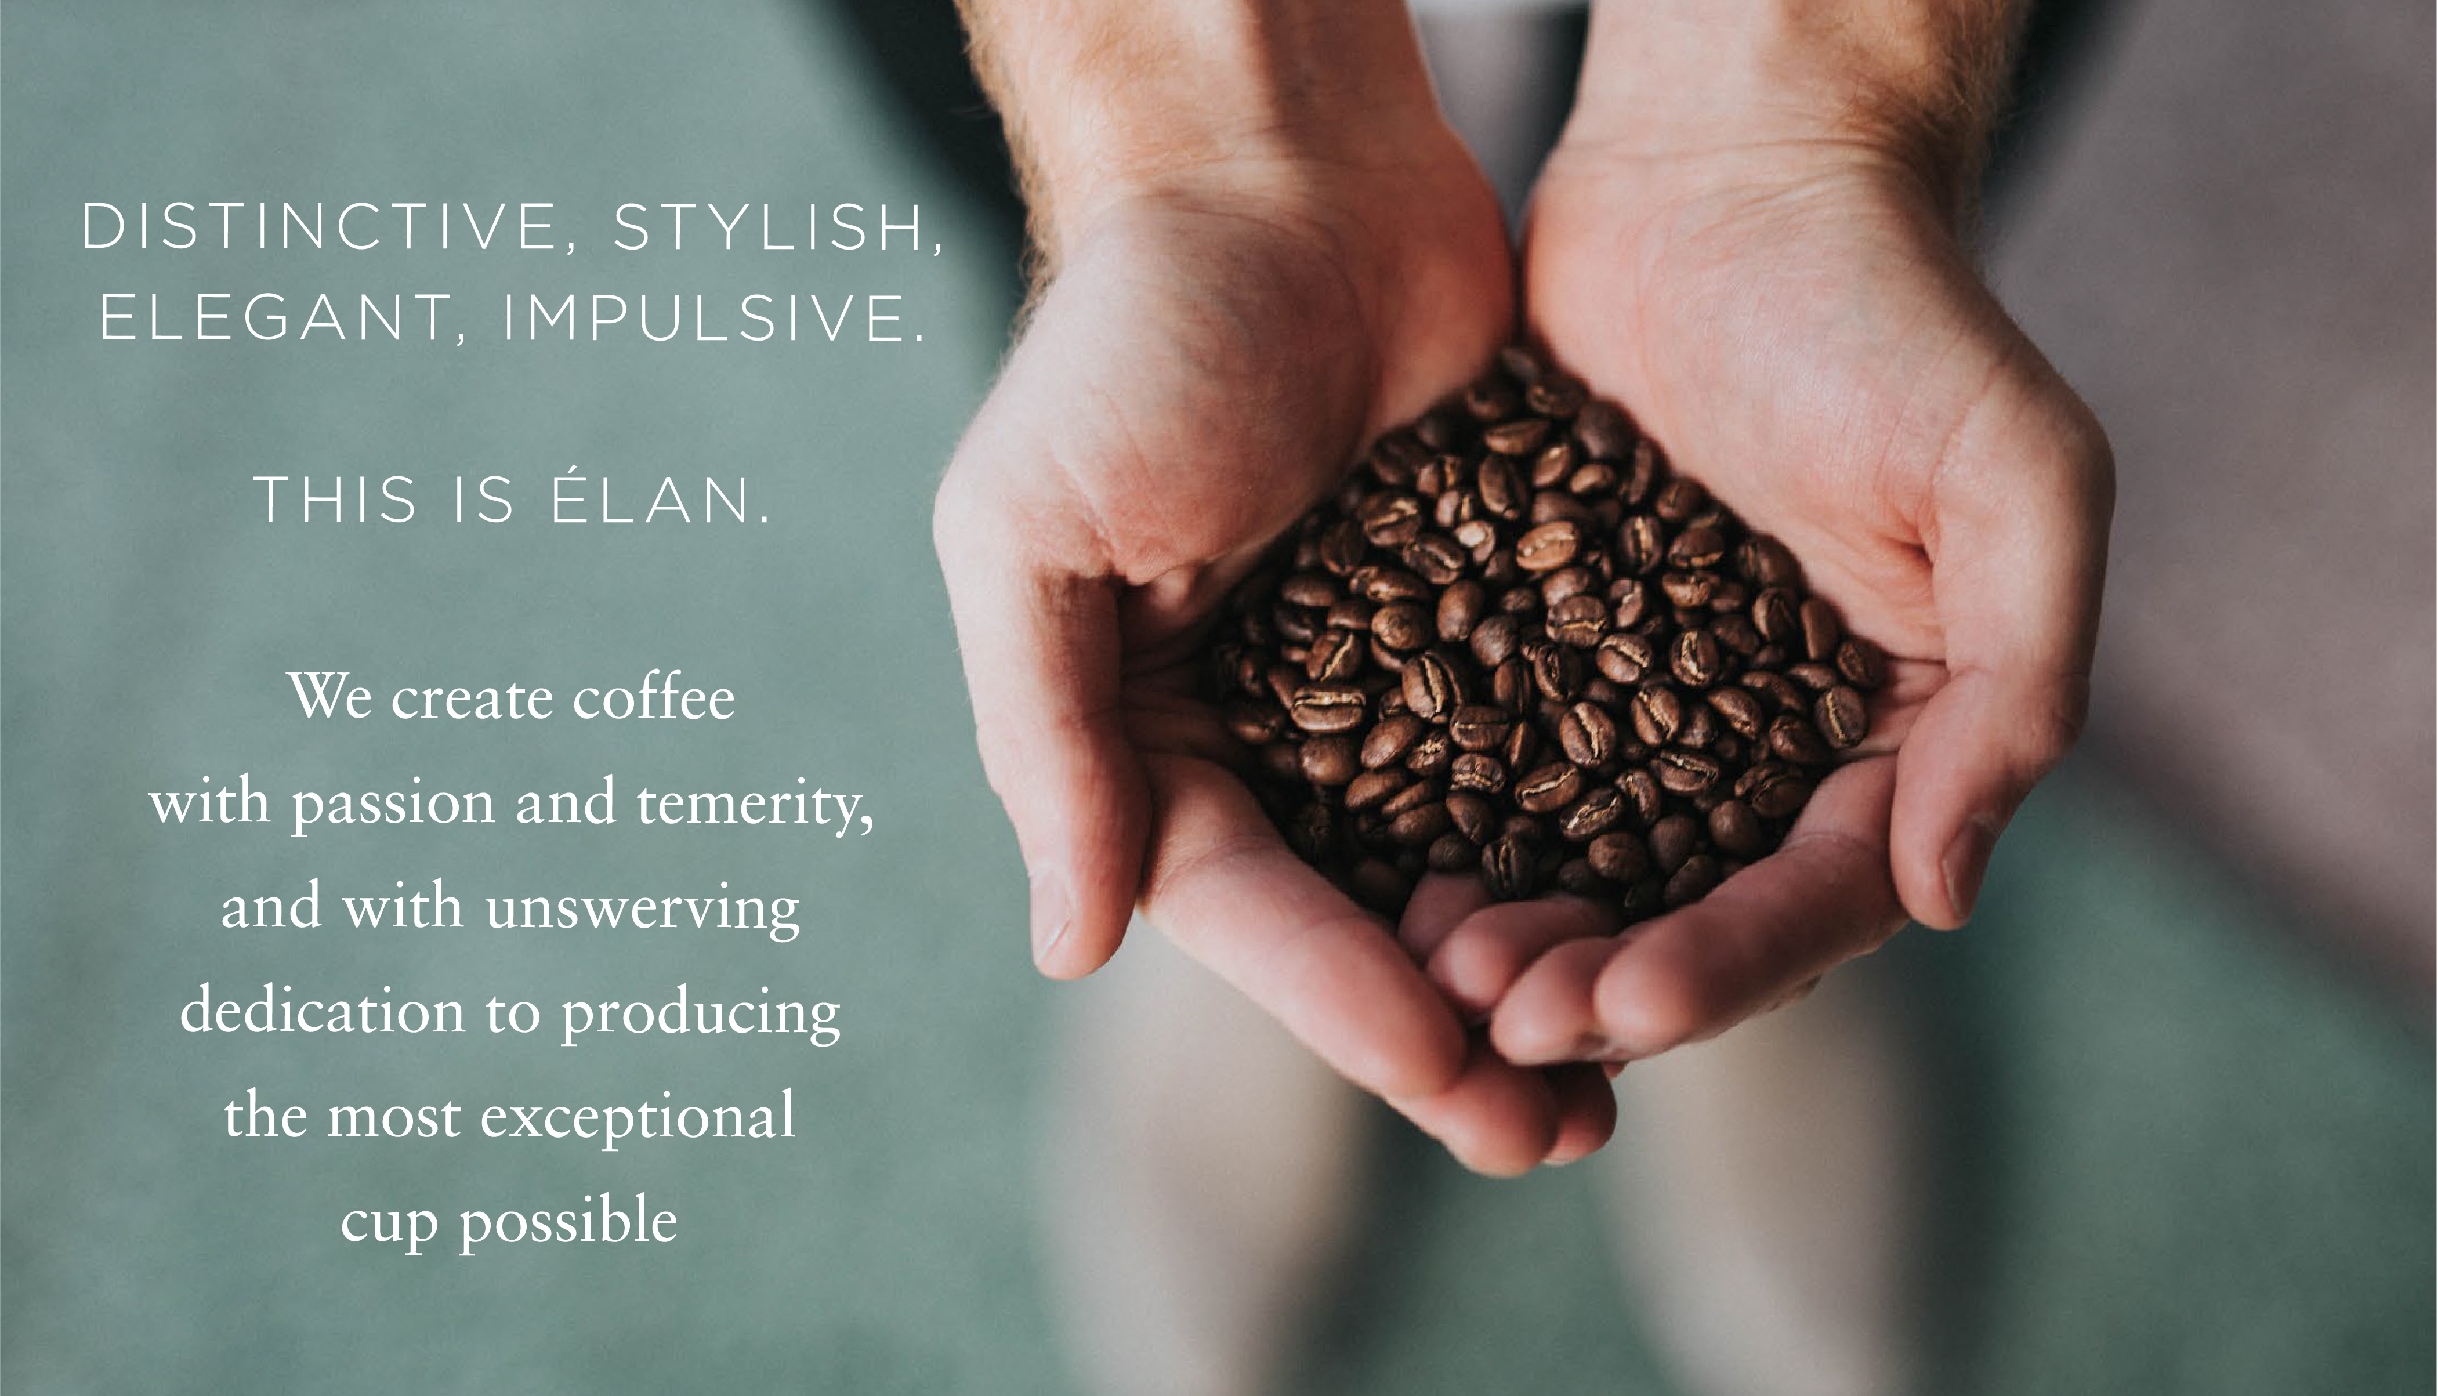 Text explaining the naming of Elan, and a man's hands holding coffee beans